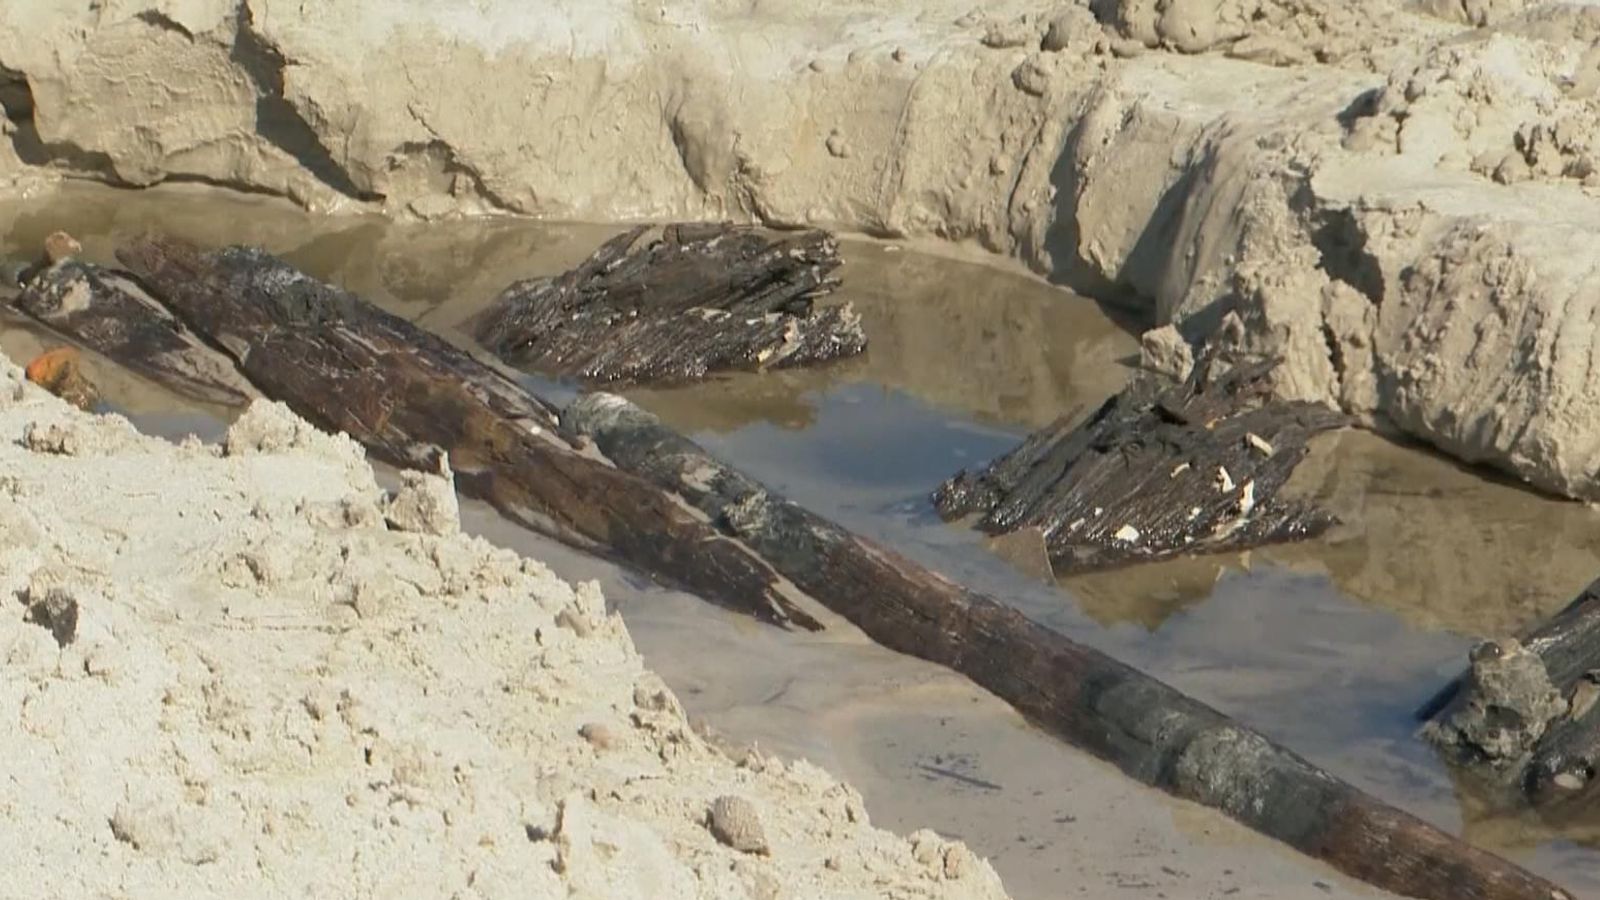 Hurricane Nicole uncovers likely shipwreck from 1800s on Daytona Beach